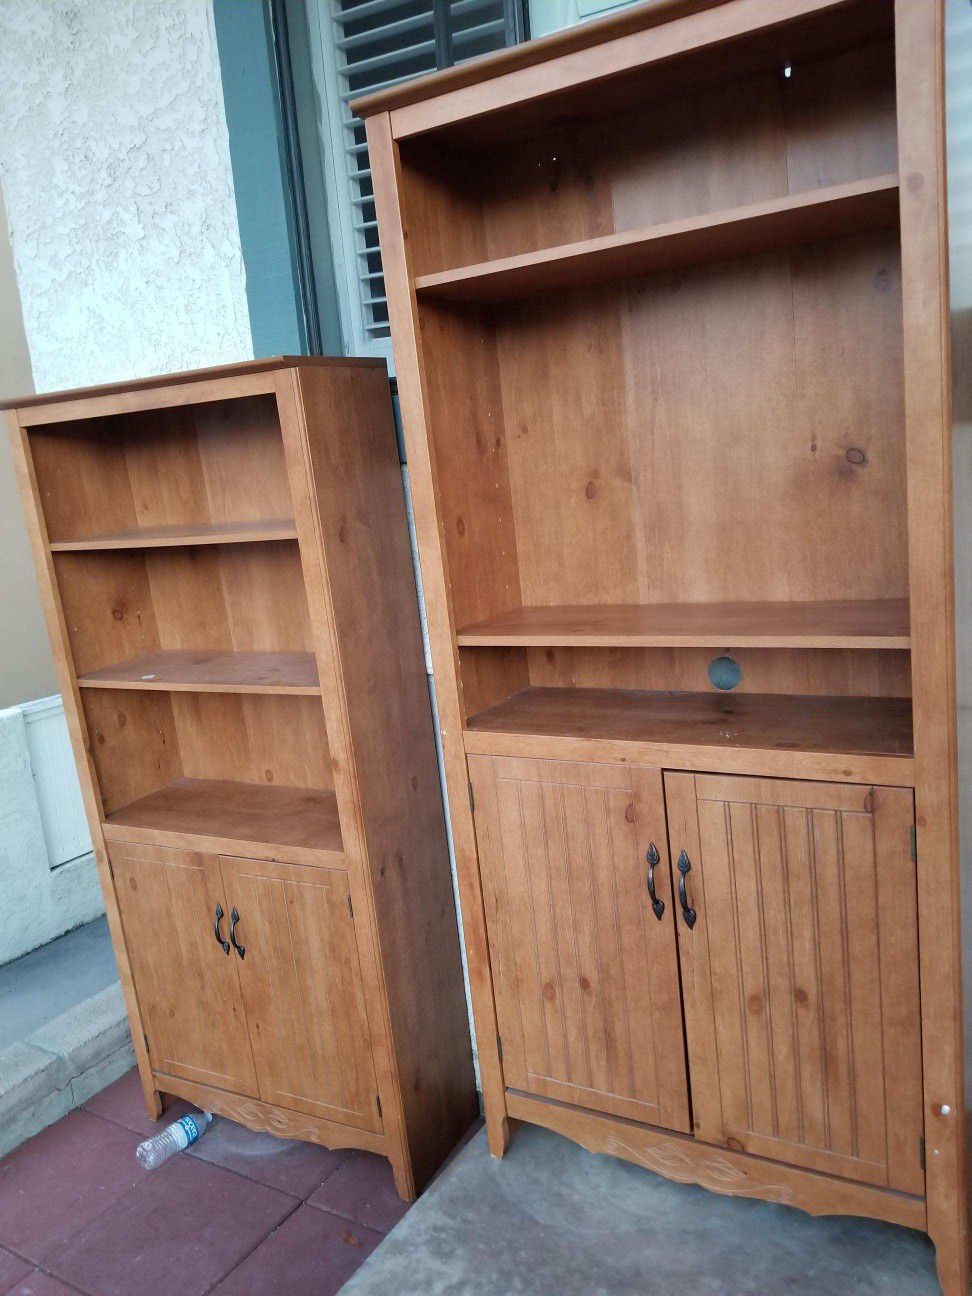 2 Tall cabinets